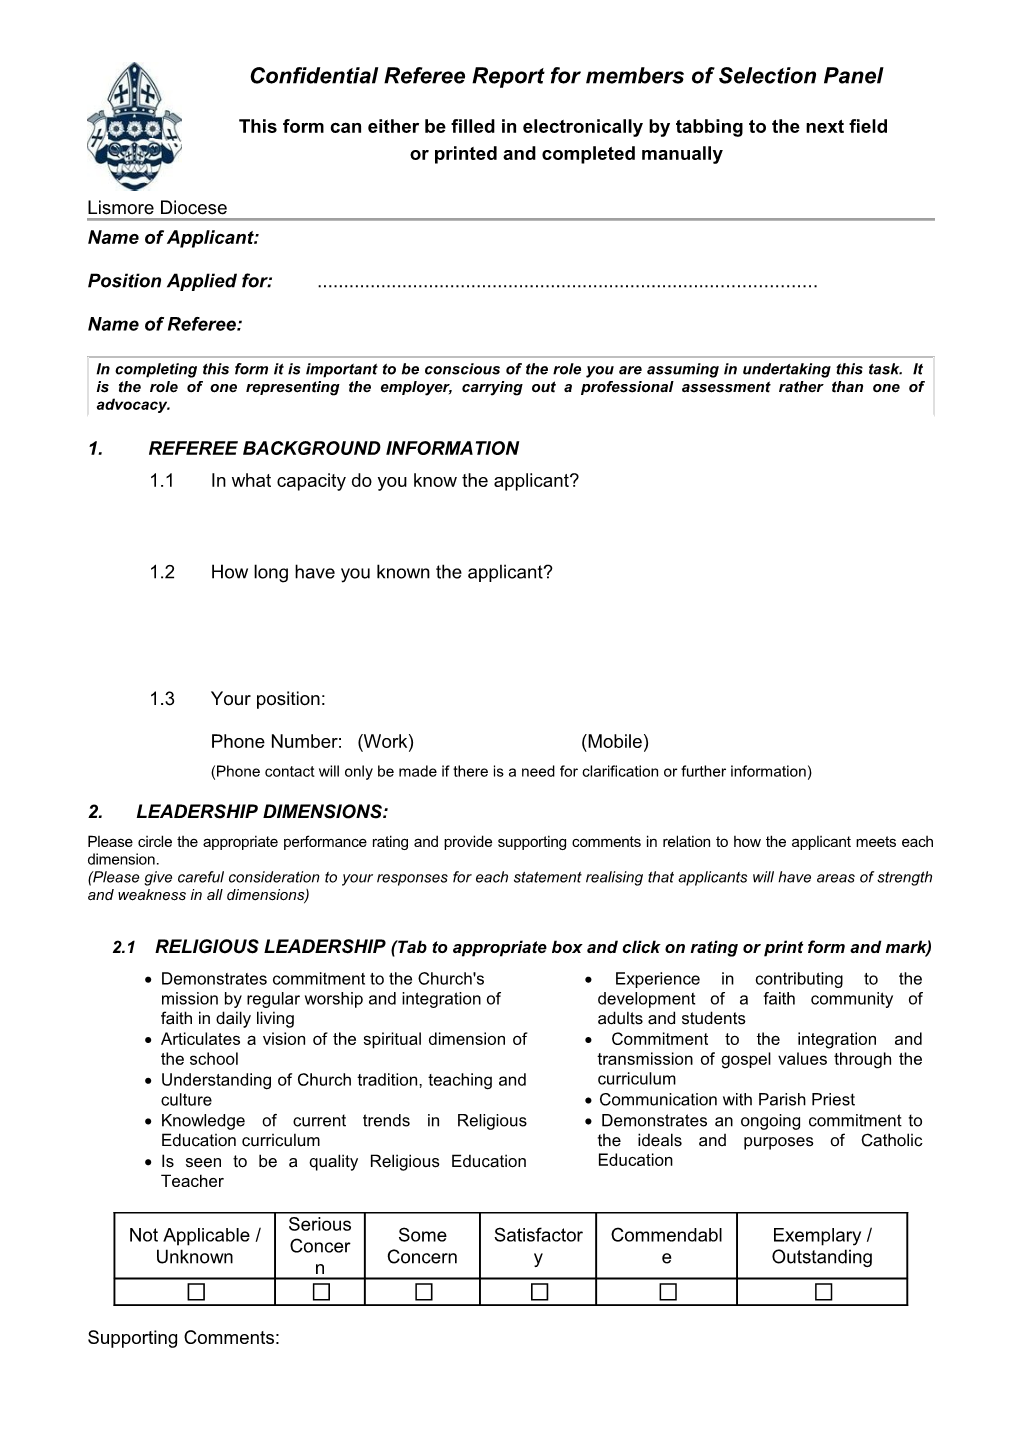 This Form Can Either Be Filled in Electronically by Tabbing to the Next Field